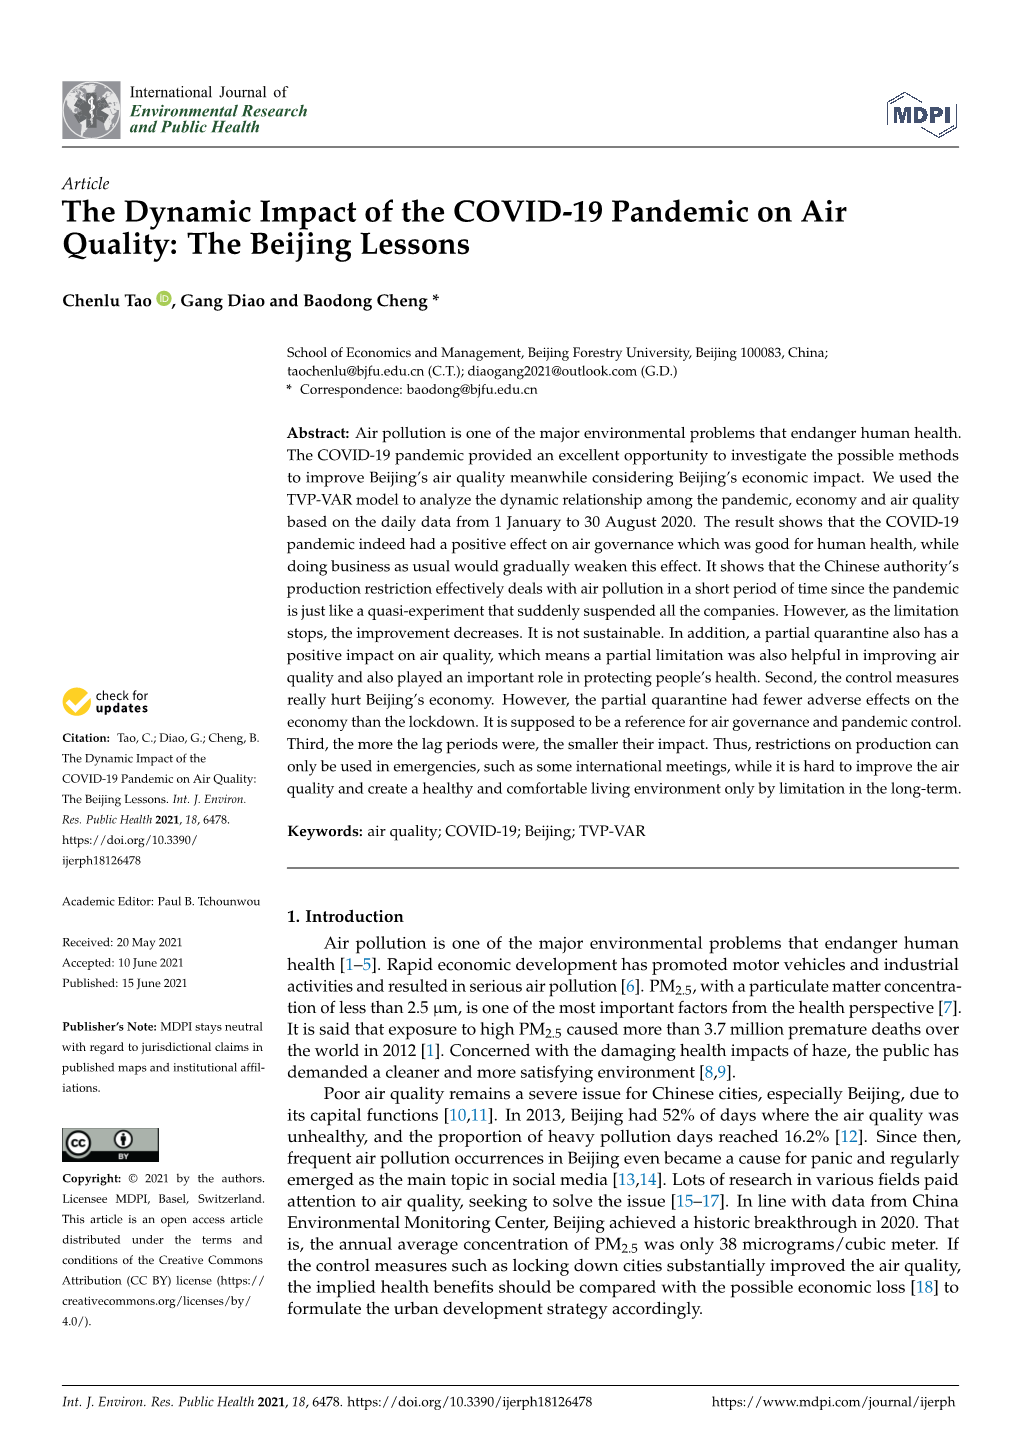 The Dynamic Impact of the COVID-19 Pandemic on Air Quality: the Beijing Lessons